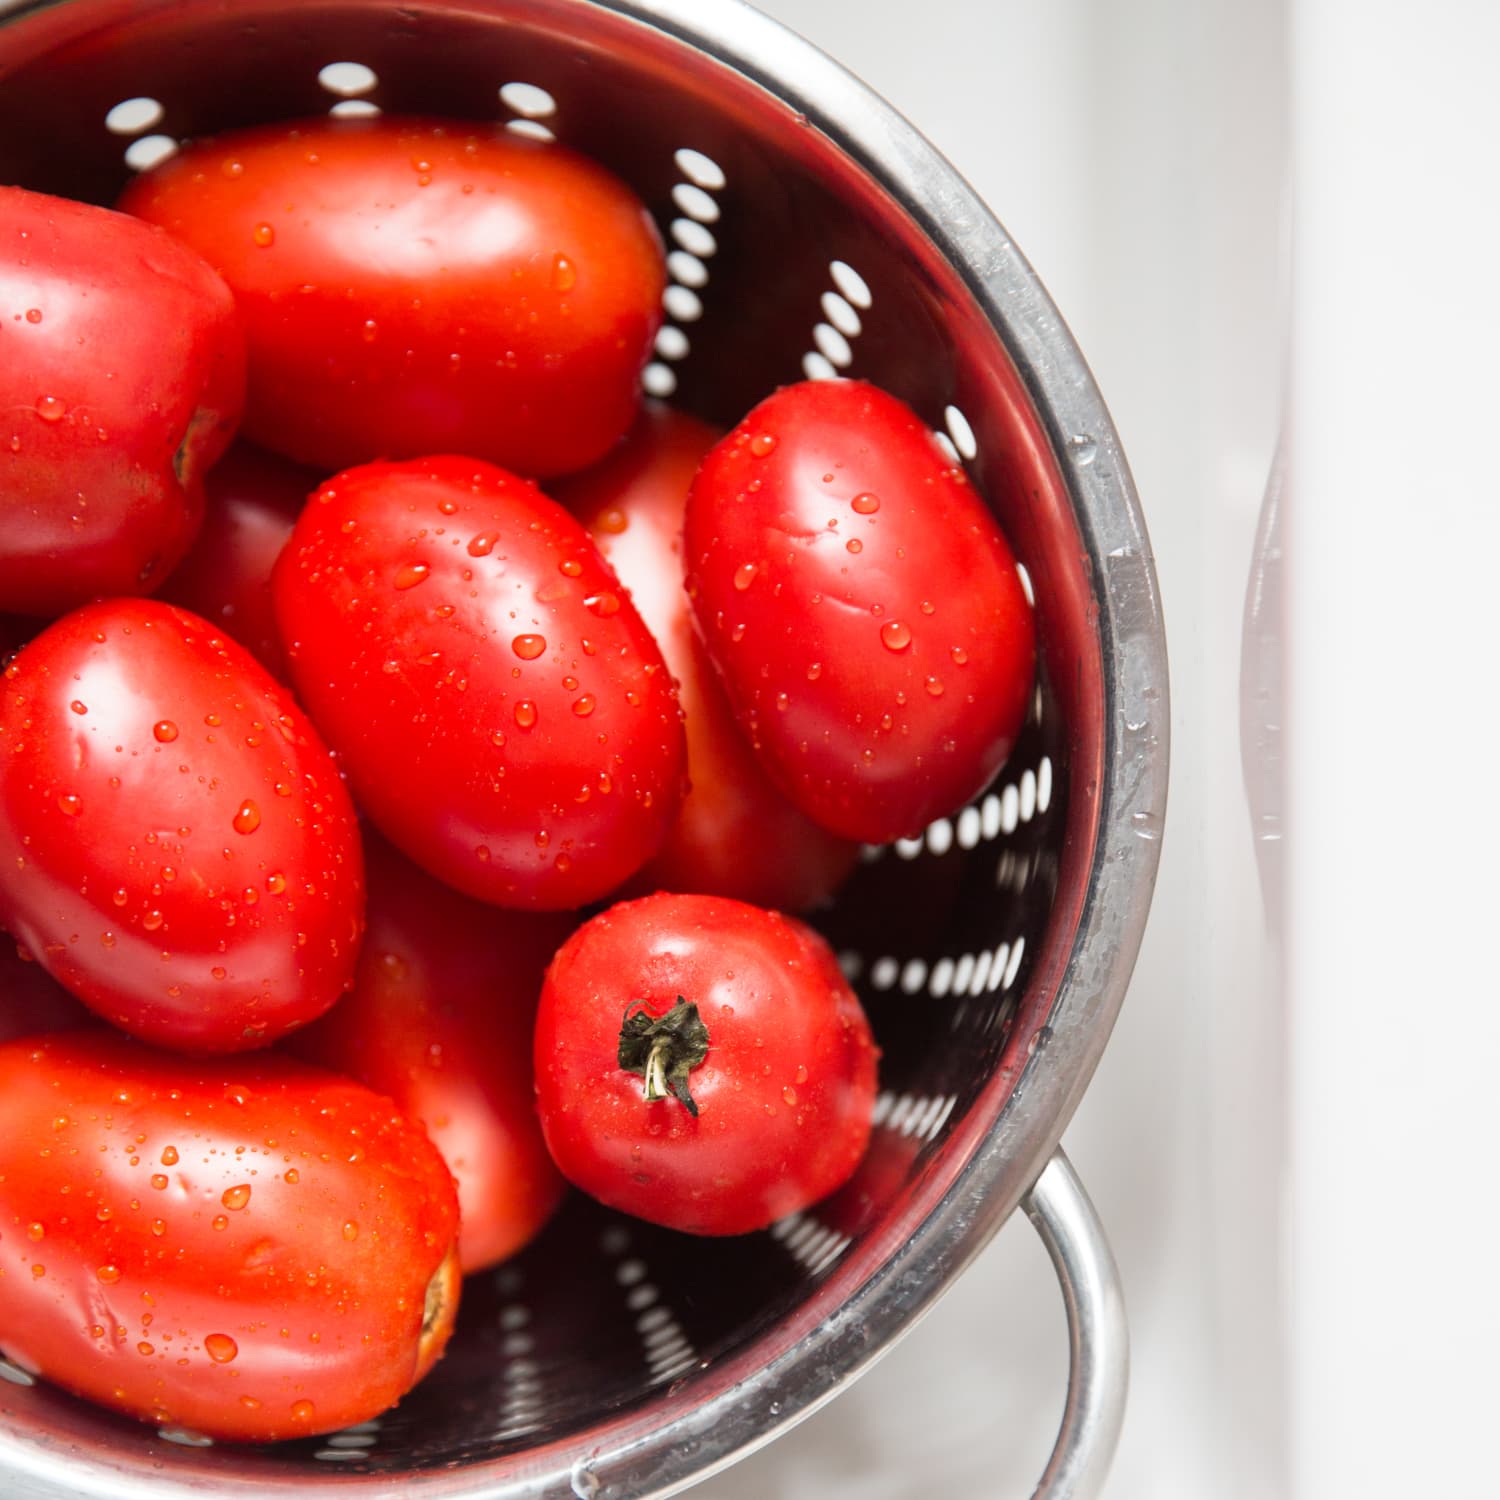 How To Freeze Tomatoes Easy Step By Step Freezing Tomato Guide Kitchn,Hot Tottie Tanning Accelerator